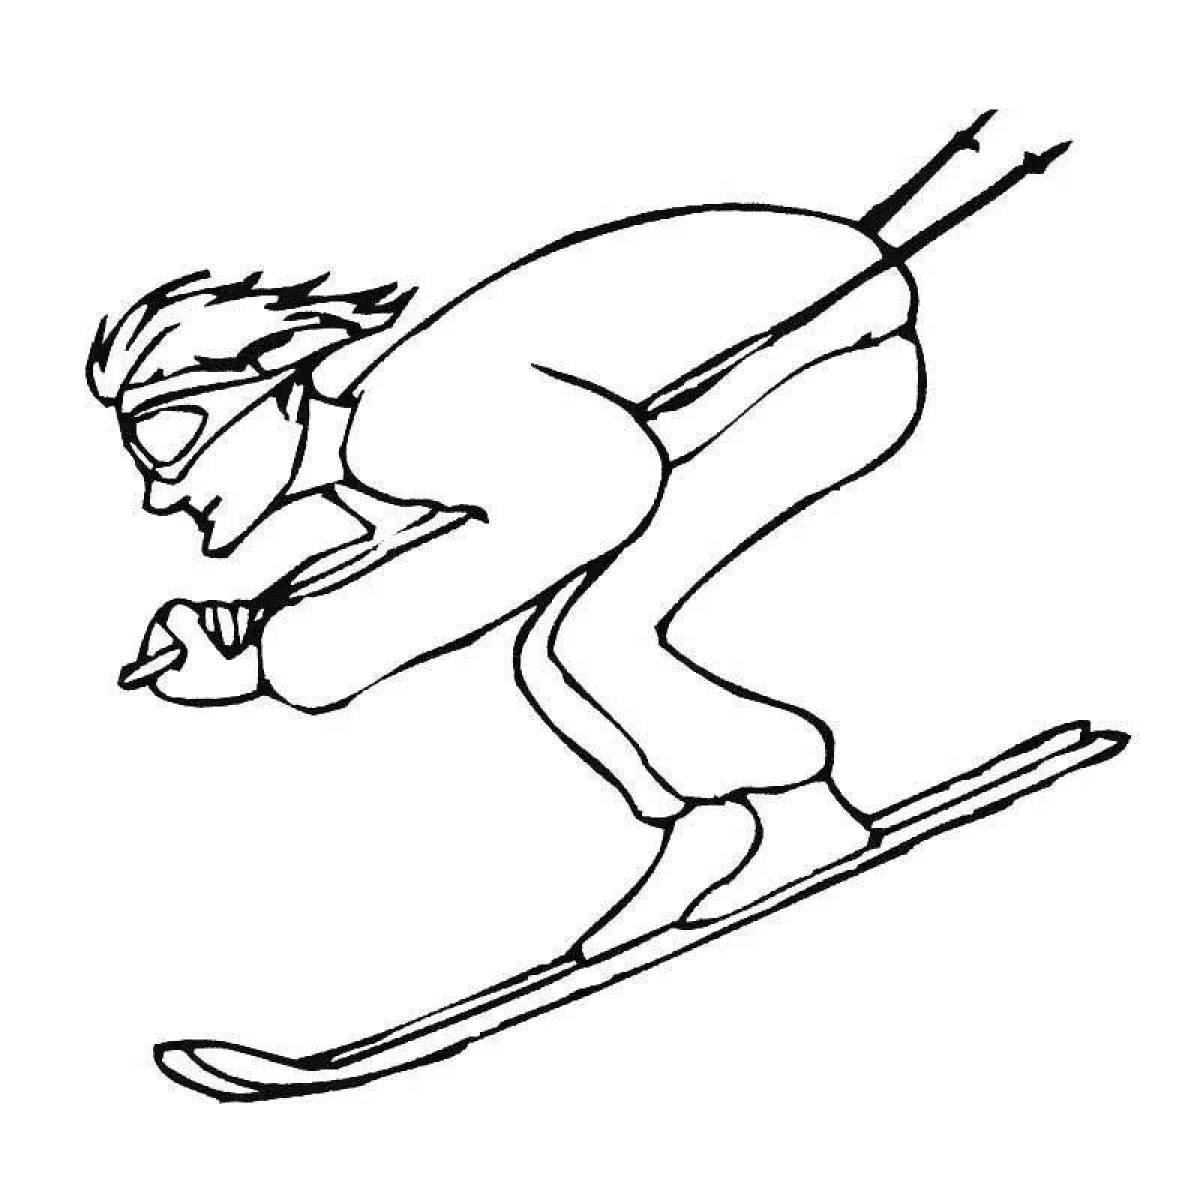 Colorful skiing coloring page